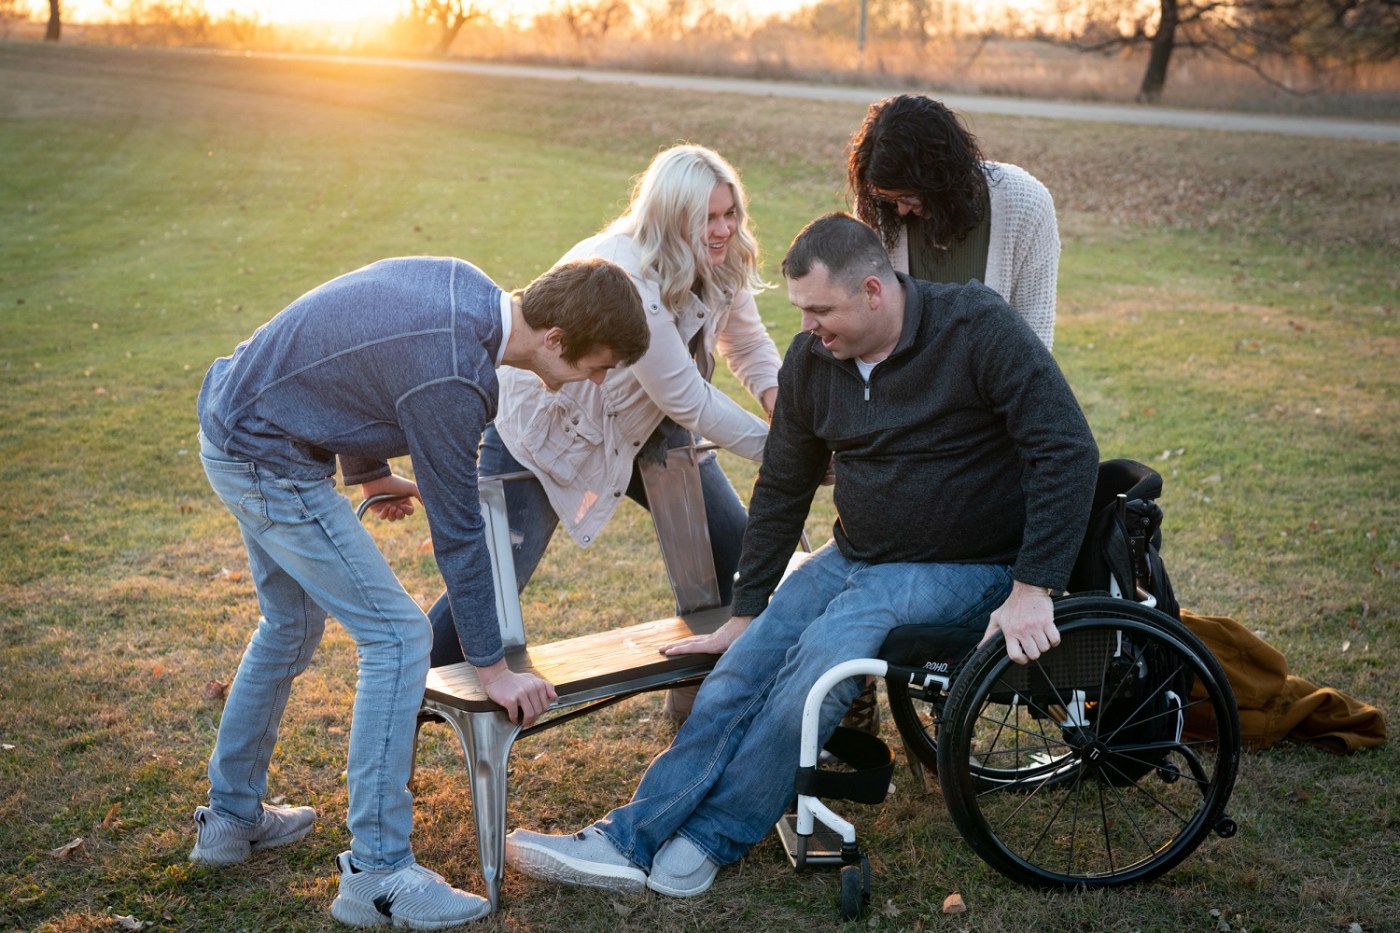 In preparation for a family photo, Army Veteran Jeff Edwards gets help from his girlfriend Dani, and kids Briona and Jakob, to transfer from his wheelchair to a bench.